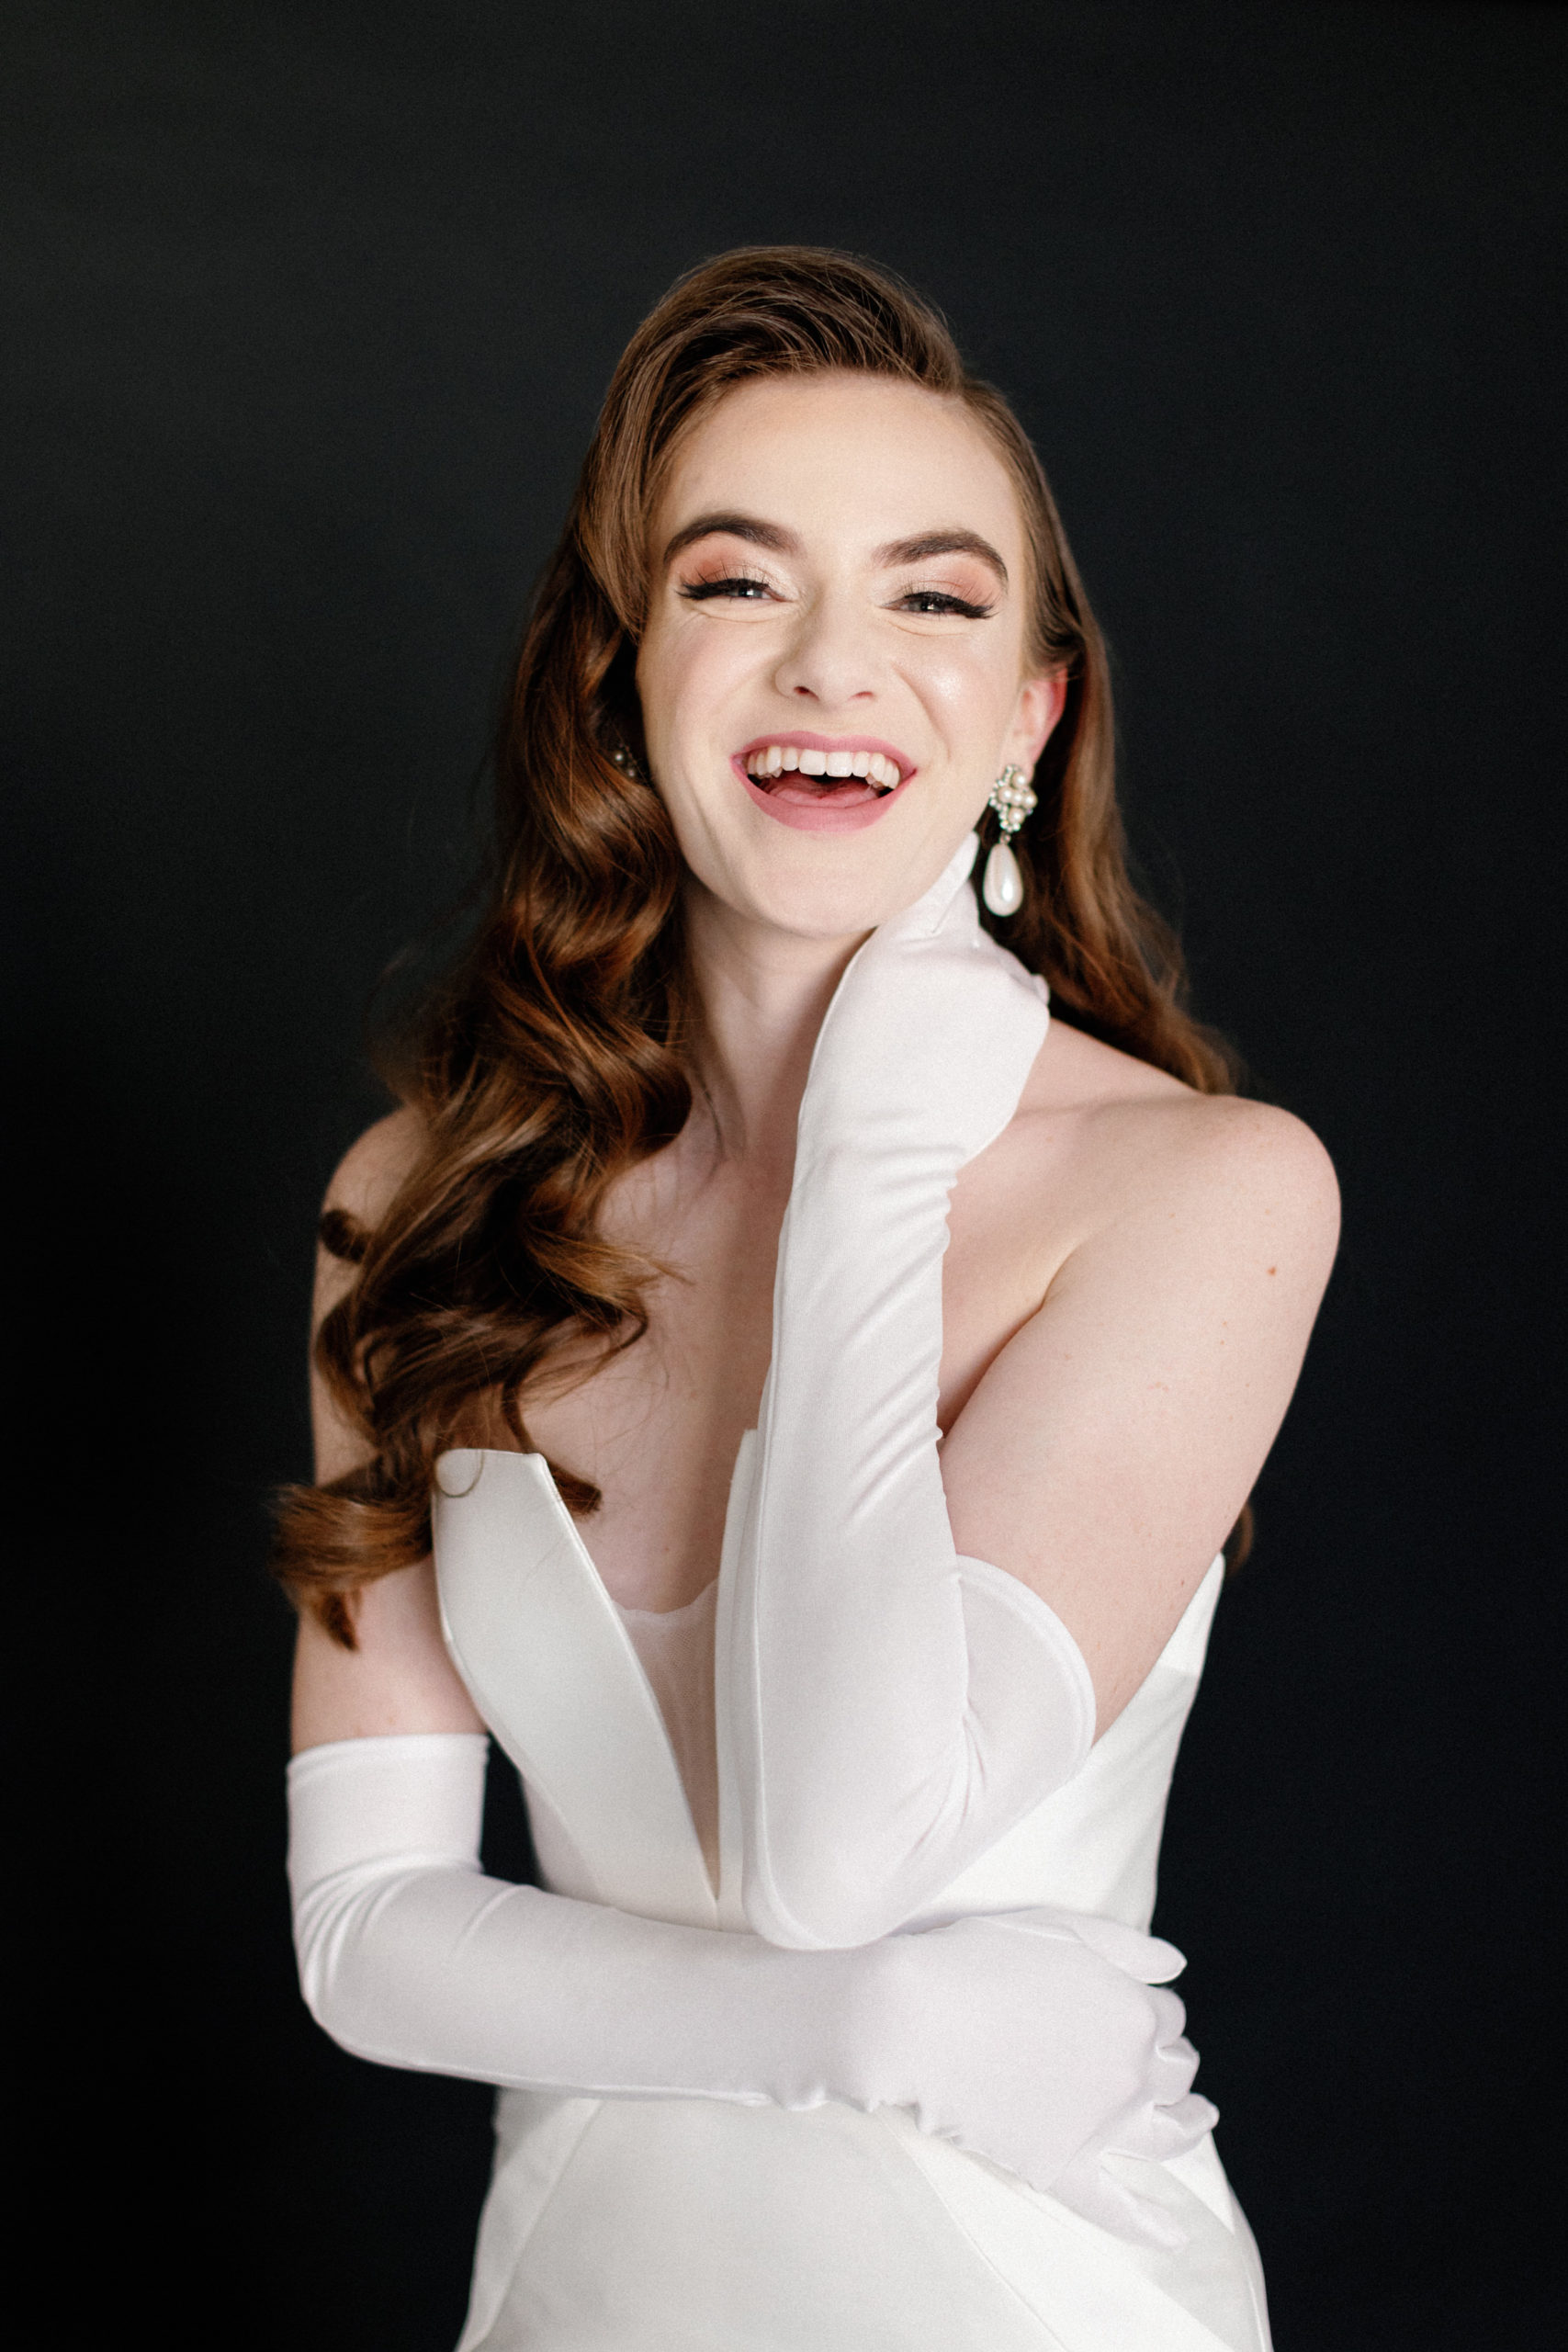 Bride in white dress and gloves laughing against black backdrop